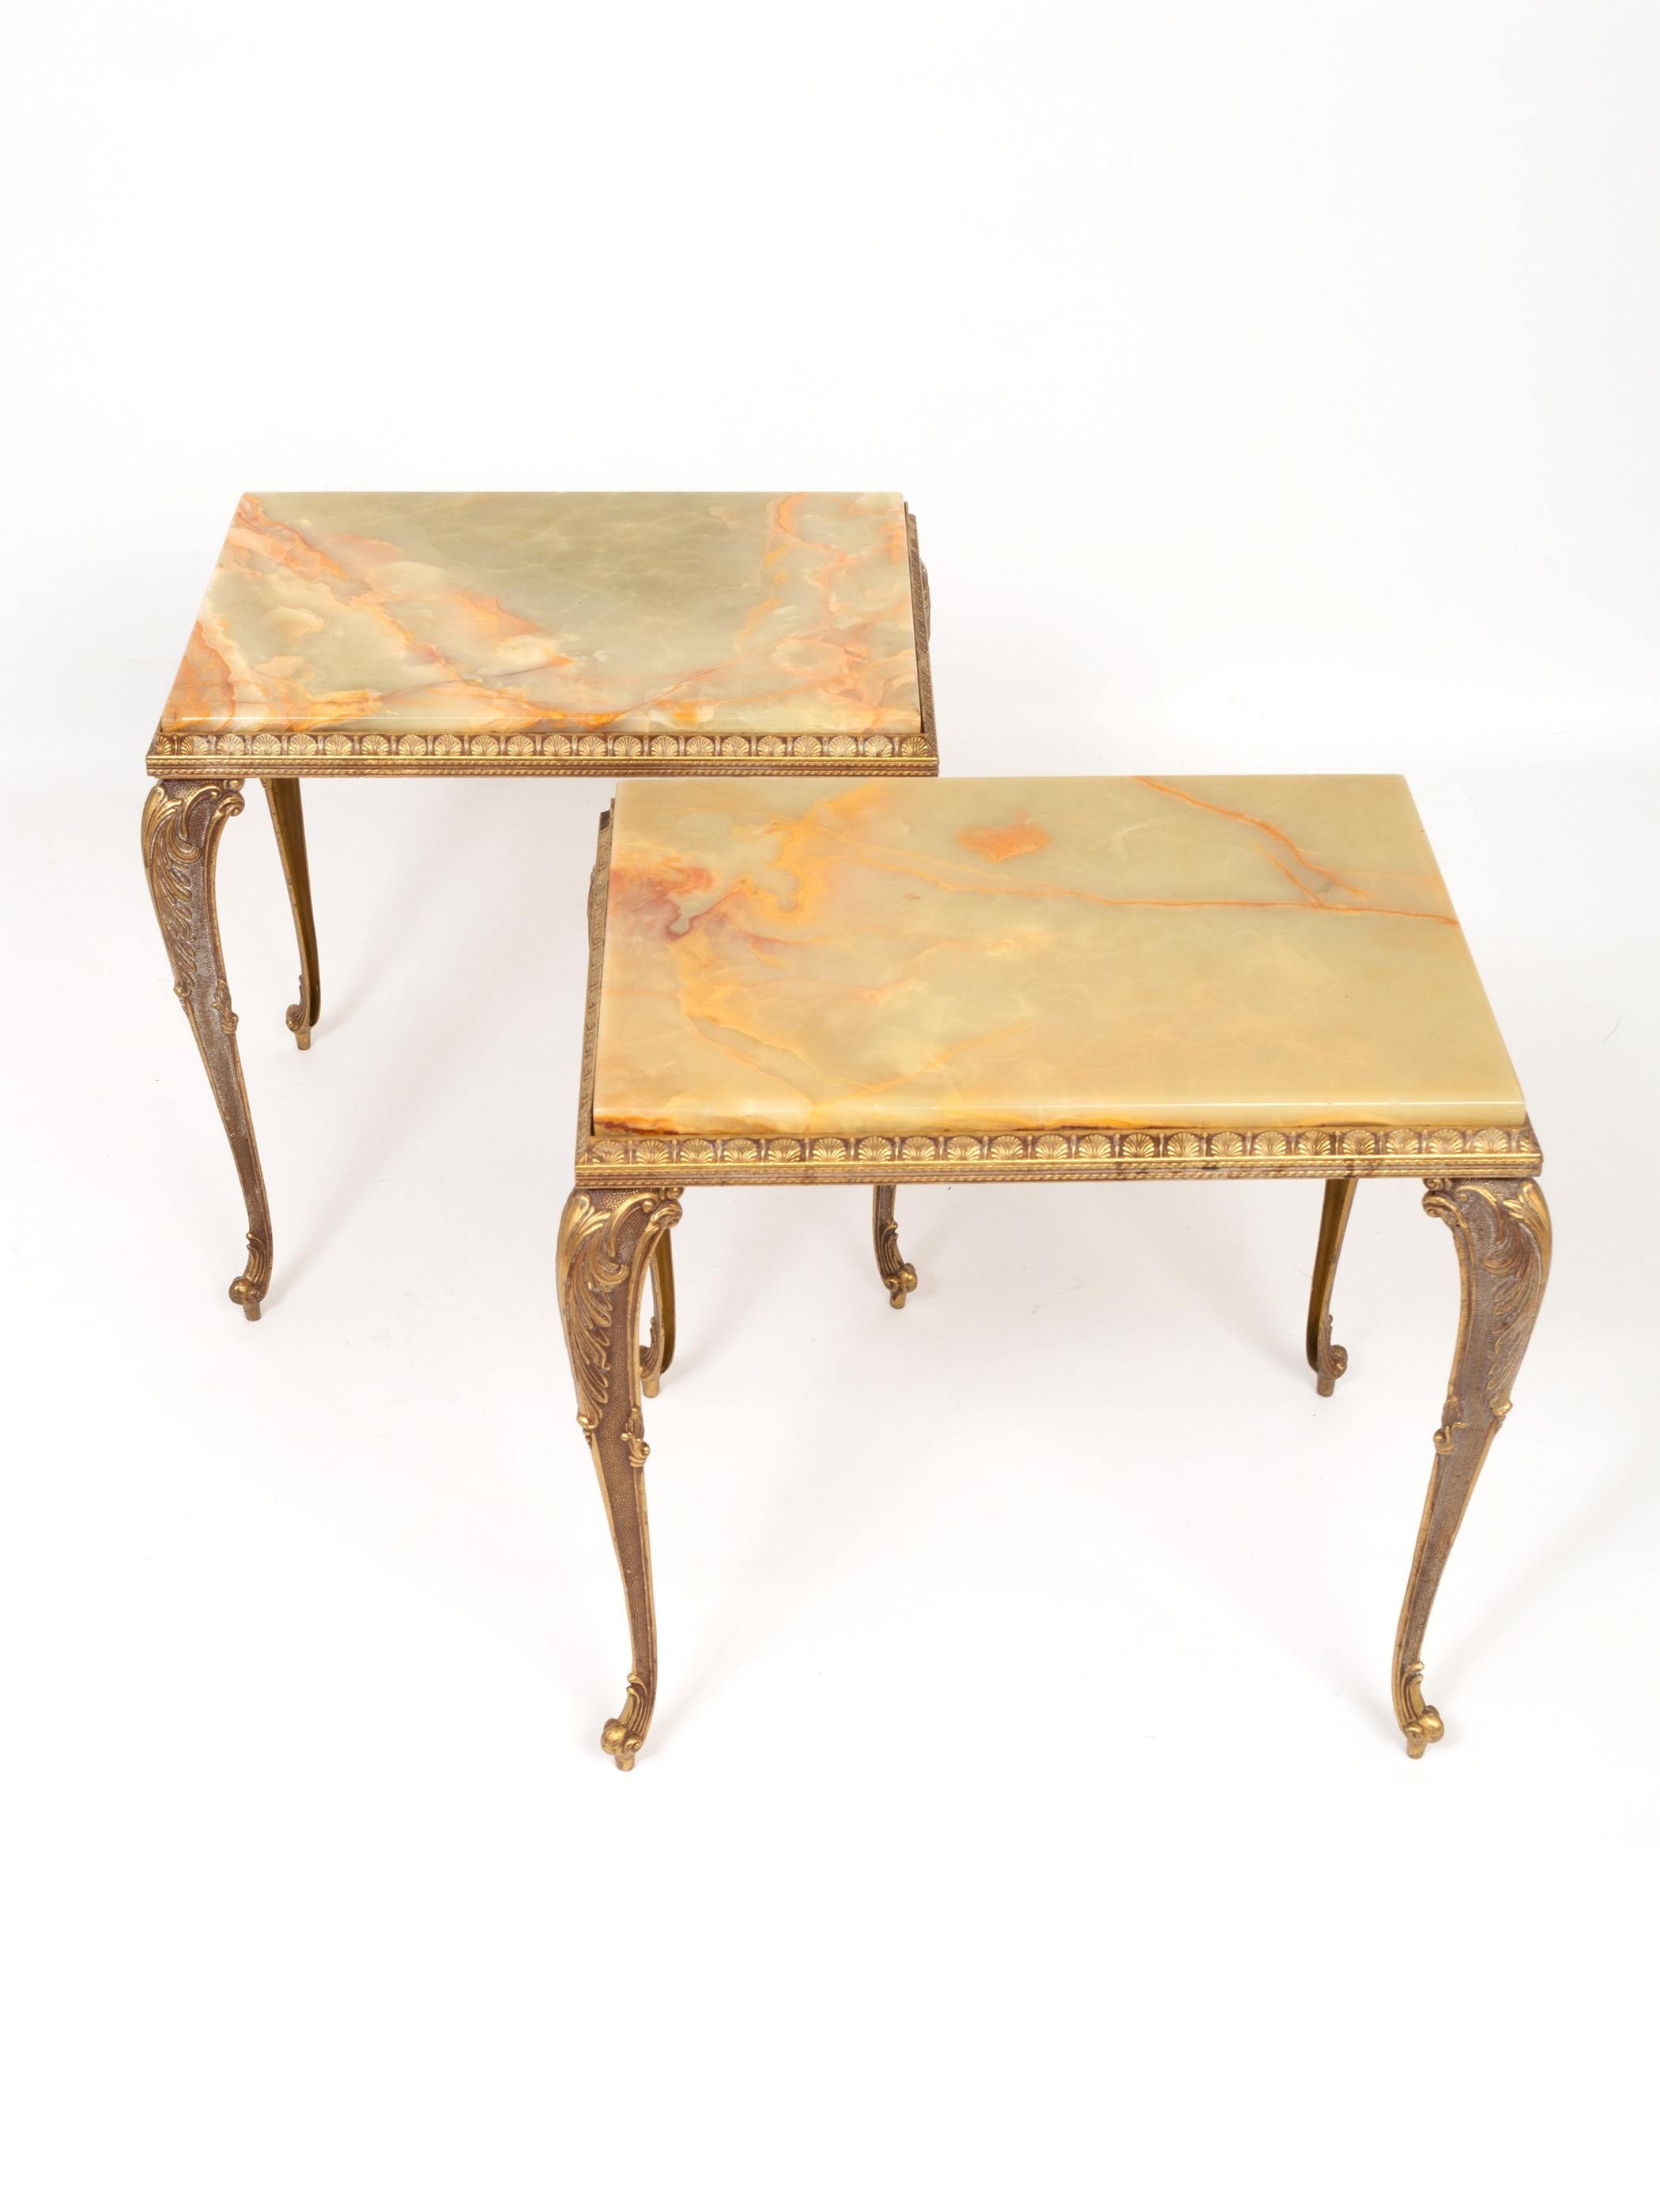 20th Century Pair French Gilt Brass and Onyx Side Lamp Tables, c.1940 For Sale